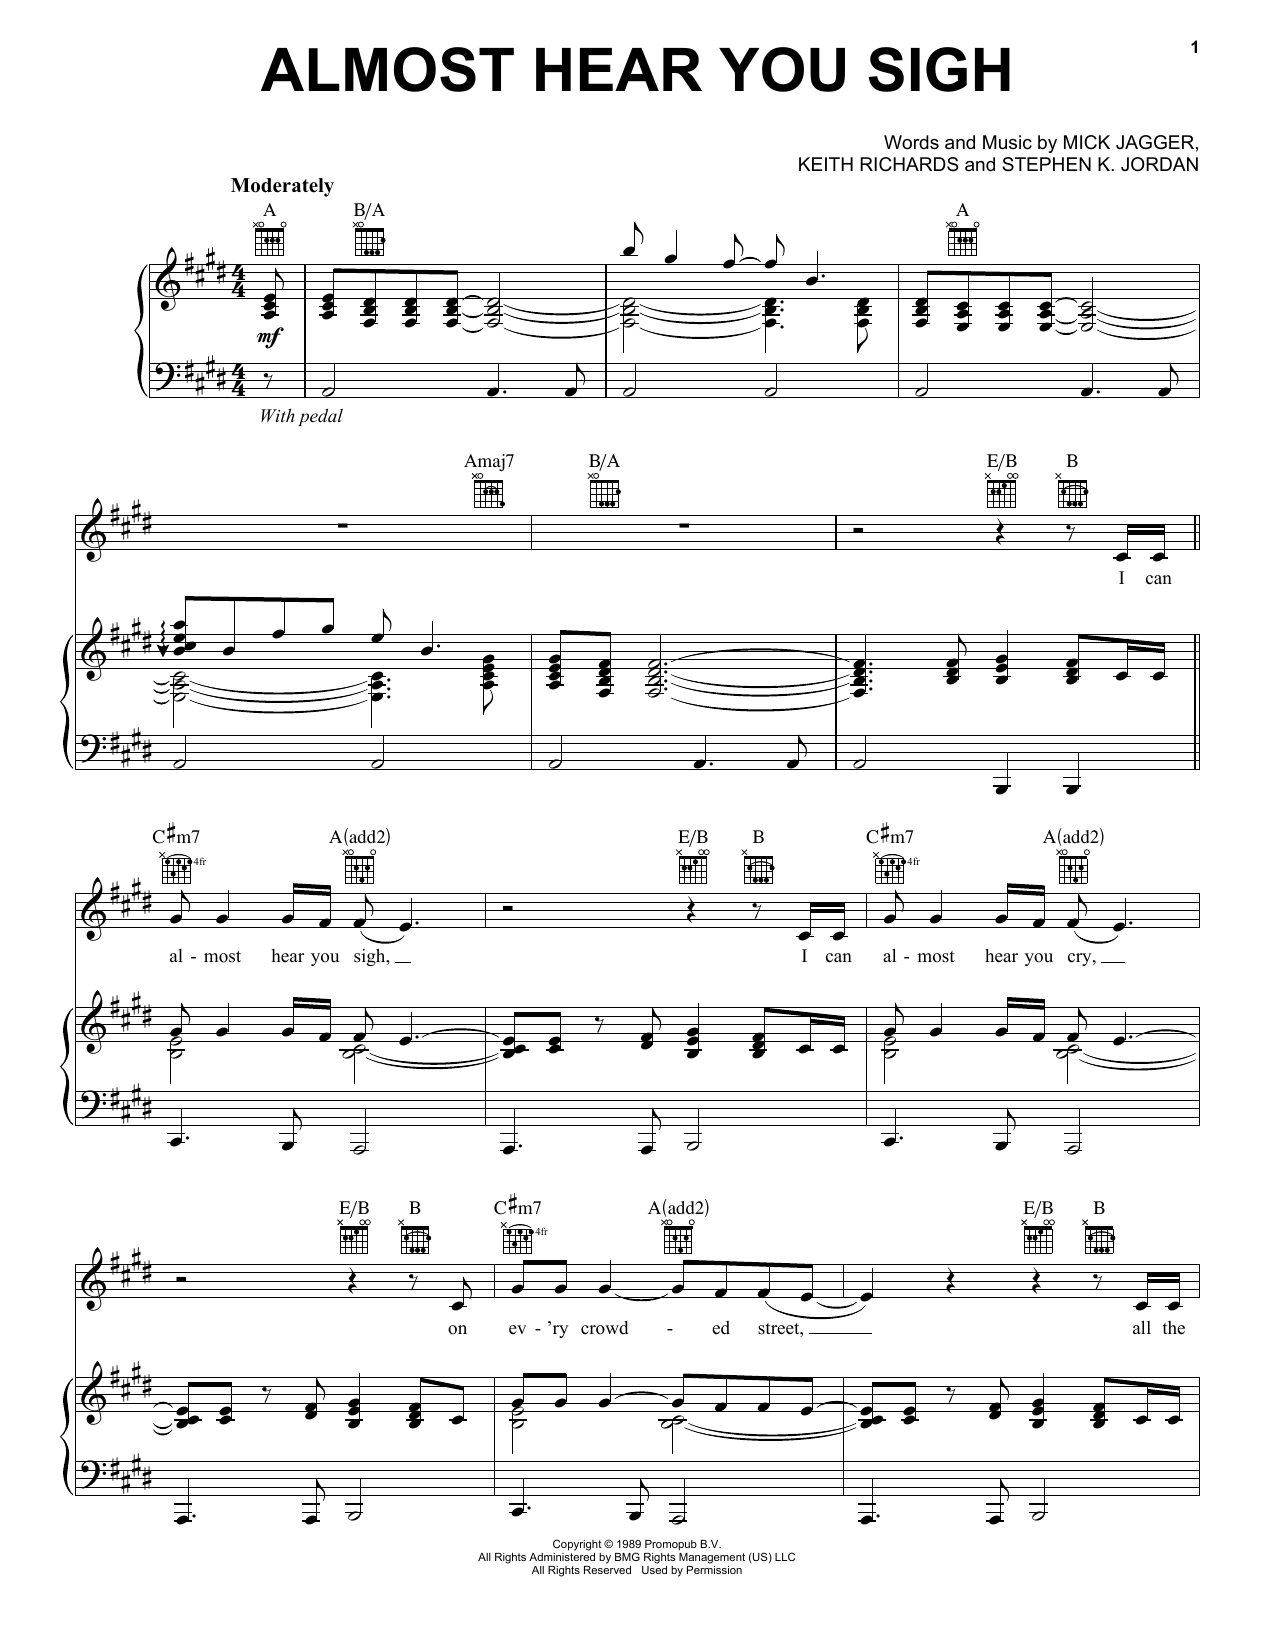 Download The Rolling Stones Almost Hear You Sigh Sheet Music